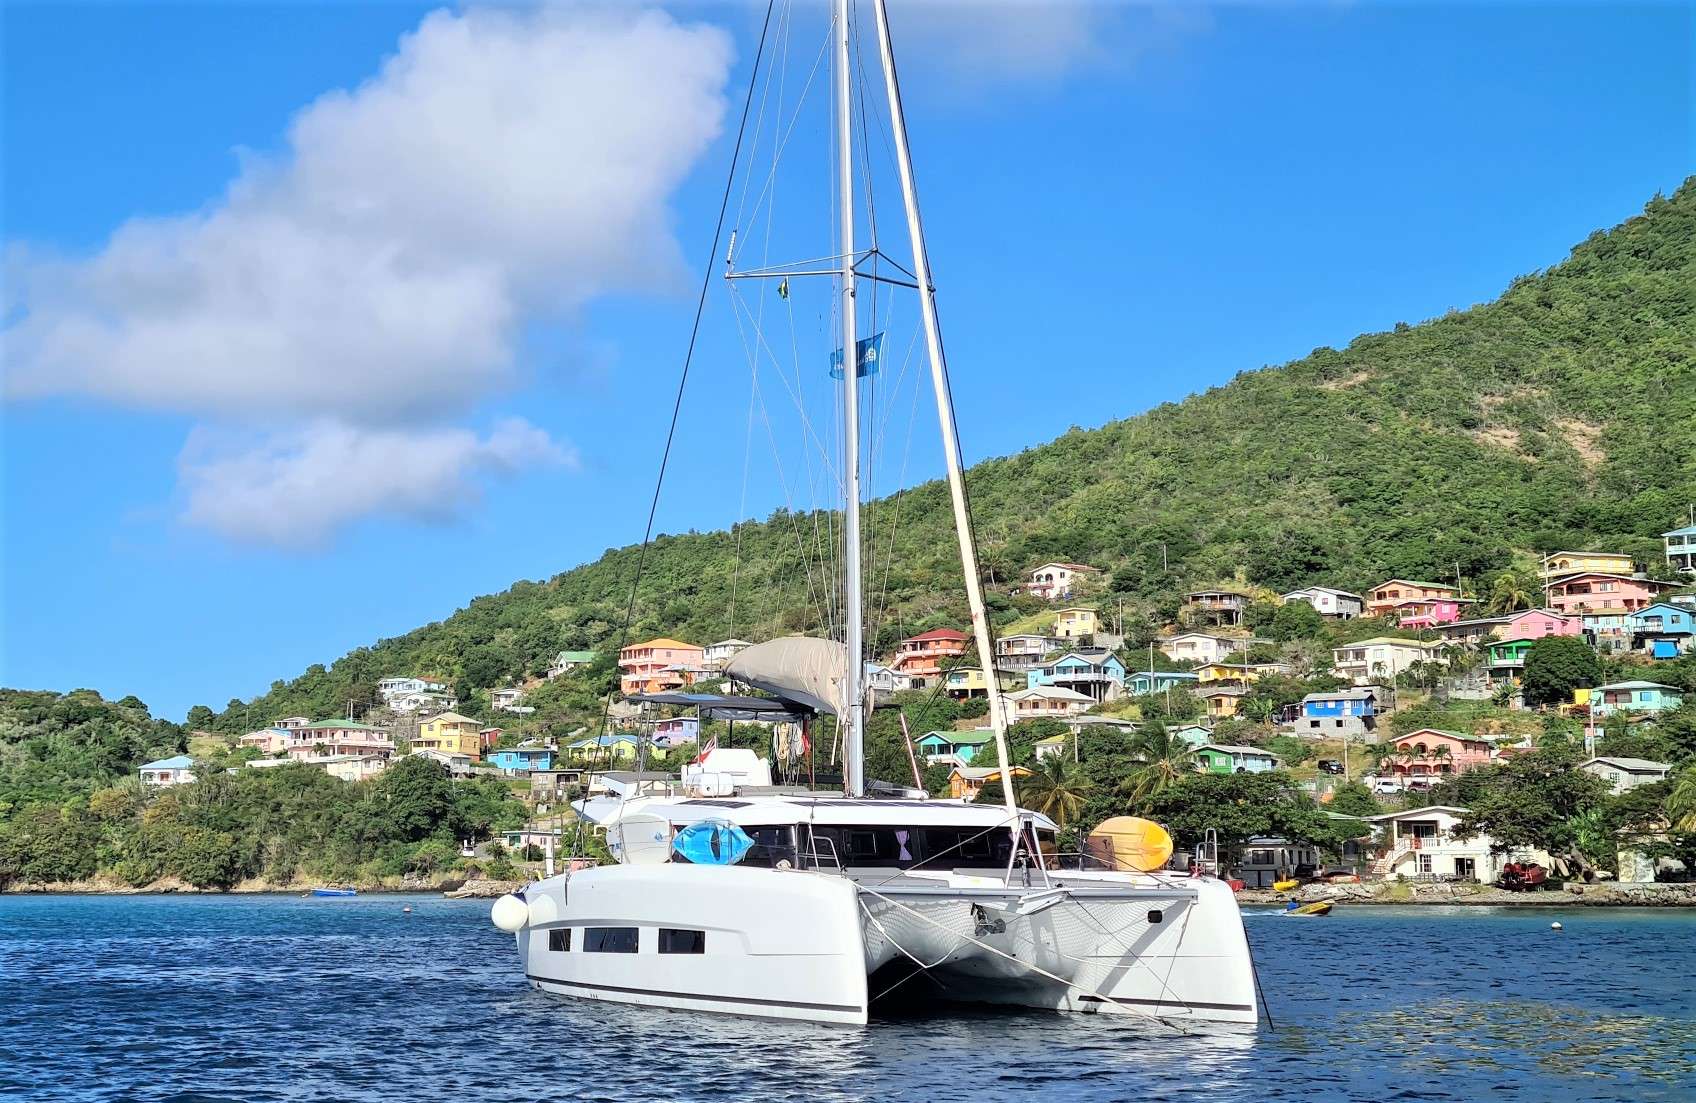 Neuroseas is a Dufour Catamaran built 2020, available for charter in the Grenadines and Grenada.

She can comfortably accommodate 8 people in 4 queen cabins with en-suite bathrooms or in 3 queens and one bunk twin cabin. All the equipment onboard is new, with lots of storage space [including space for dive tanks as we can offer diving with a local dive guide onboard], large 25 HP tender for water sports and multiple sunbathing decks including the spacious flybridge.

Waking up with the perfect view out of the big windows creates the special ambience in each cabin.  The crew also offer full cabin service including linen changes, turn down and towels replacement.

The cockpit area is very spacious and up to 8 people can be seated easily for breakfast, lunch or dinner. Or do you prefer an evening dance? &ndash; The lights will be dimmed, and the captain&acute;s guitar is ready.